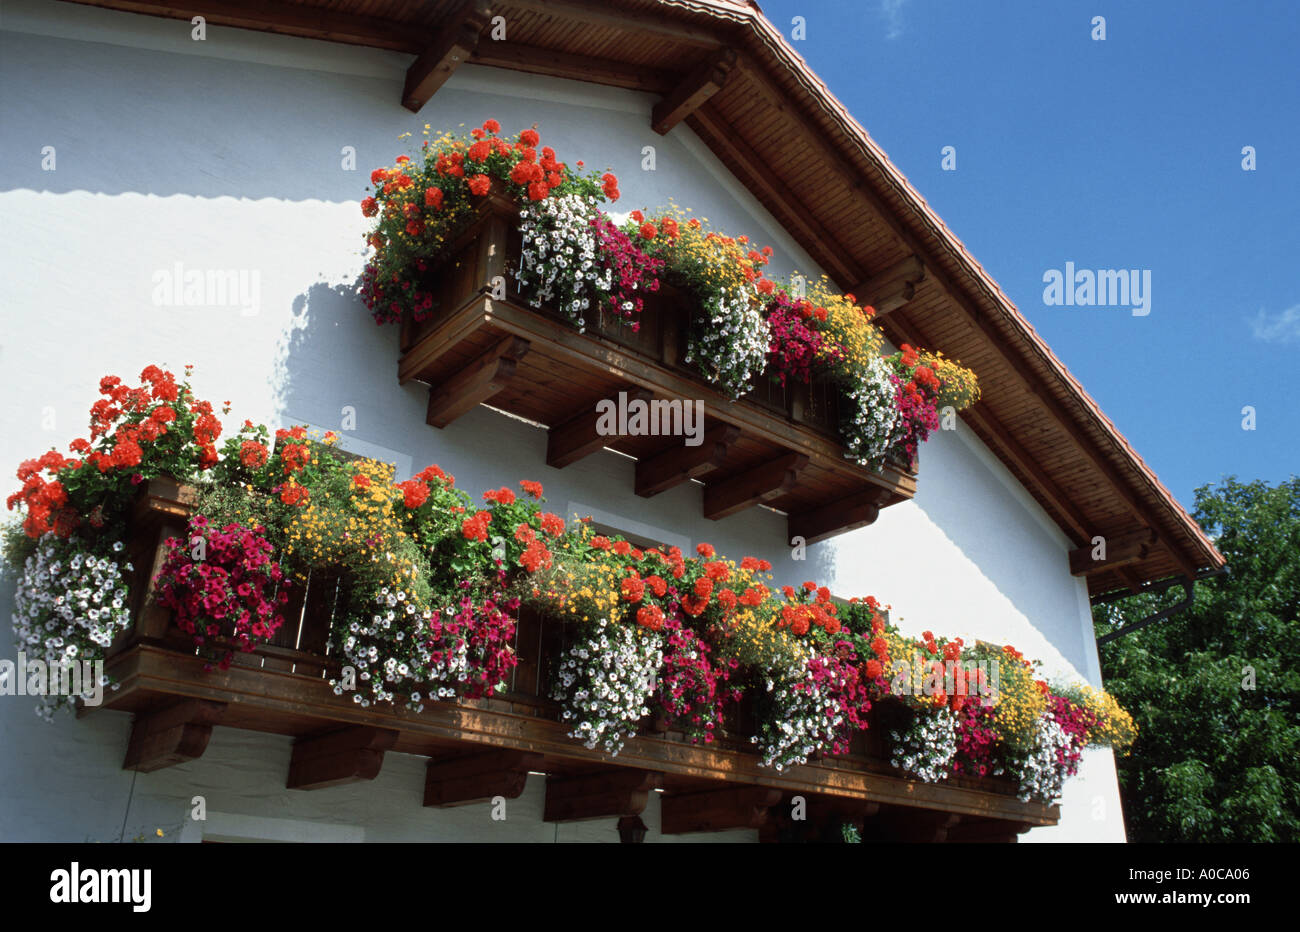 BAVARIA bavarian farm house with typical Balcony with flowers bavarian woods forest balkon ornament adornment bavarian country Stock Photo